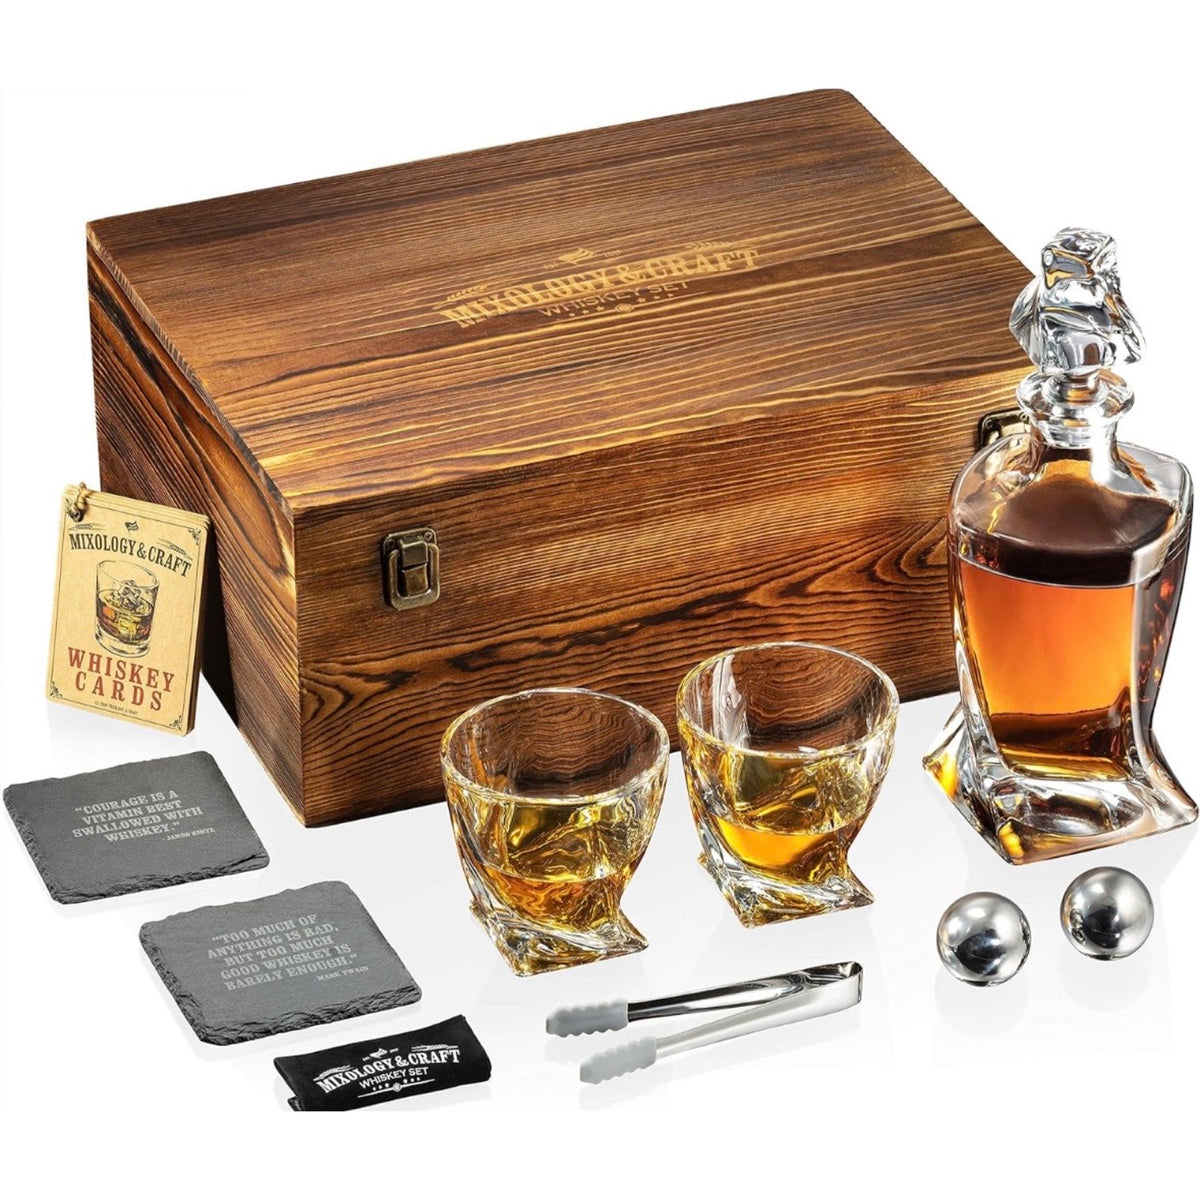 10pc Mixology & Craft Whiskey Set - Glasses, Decanter, Chillers & More